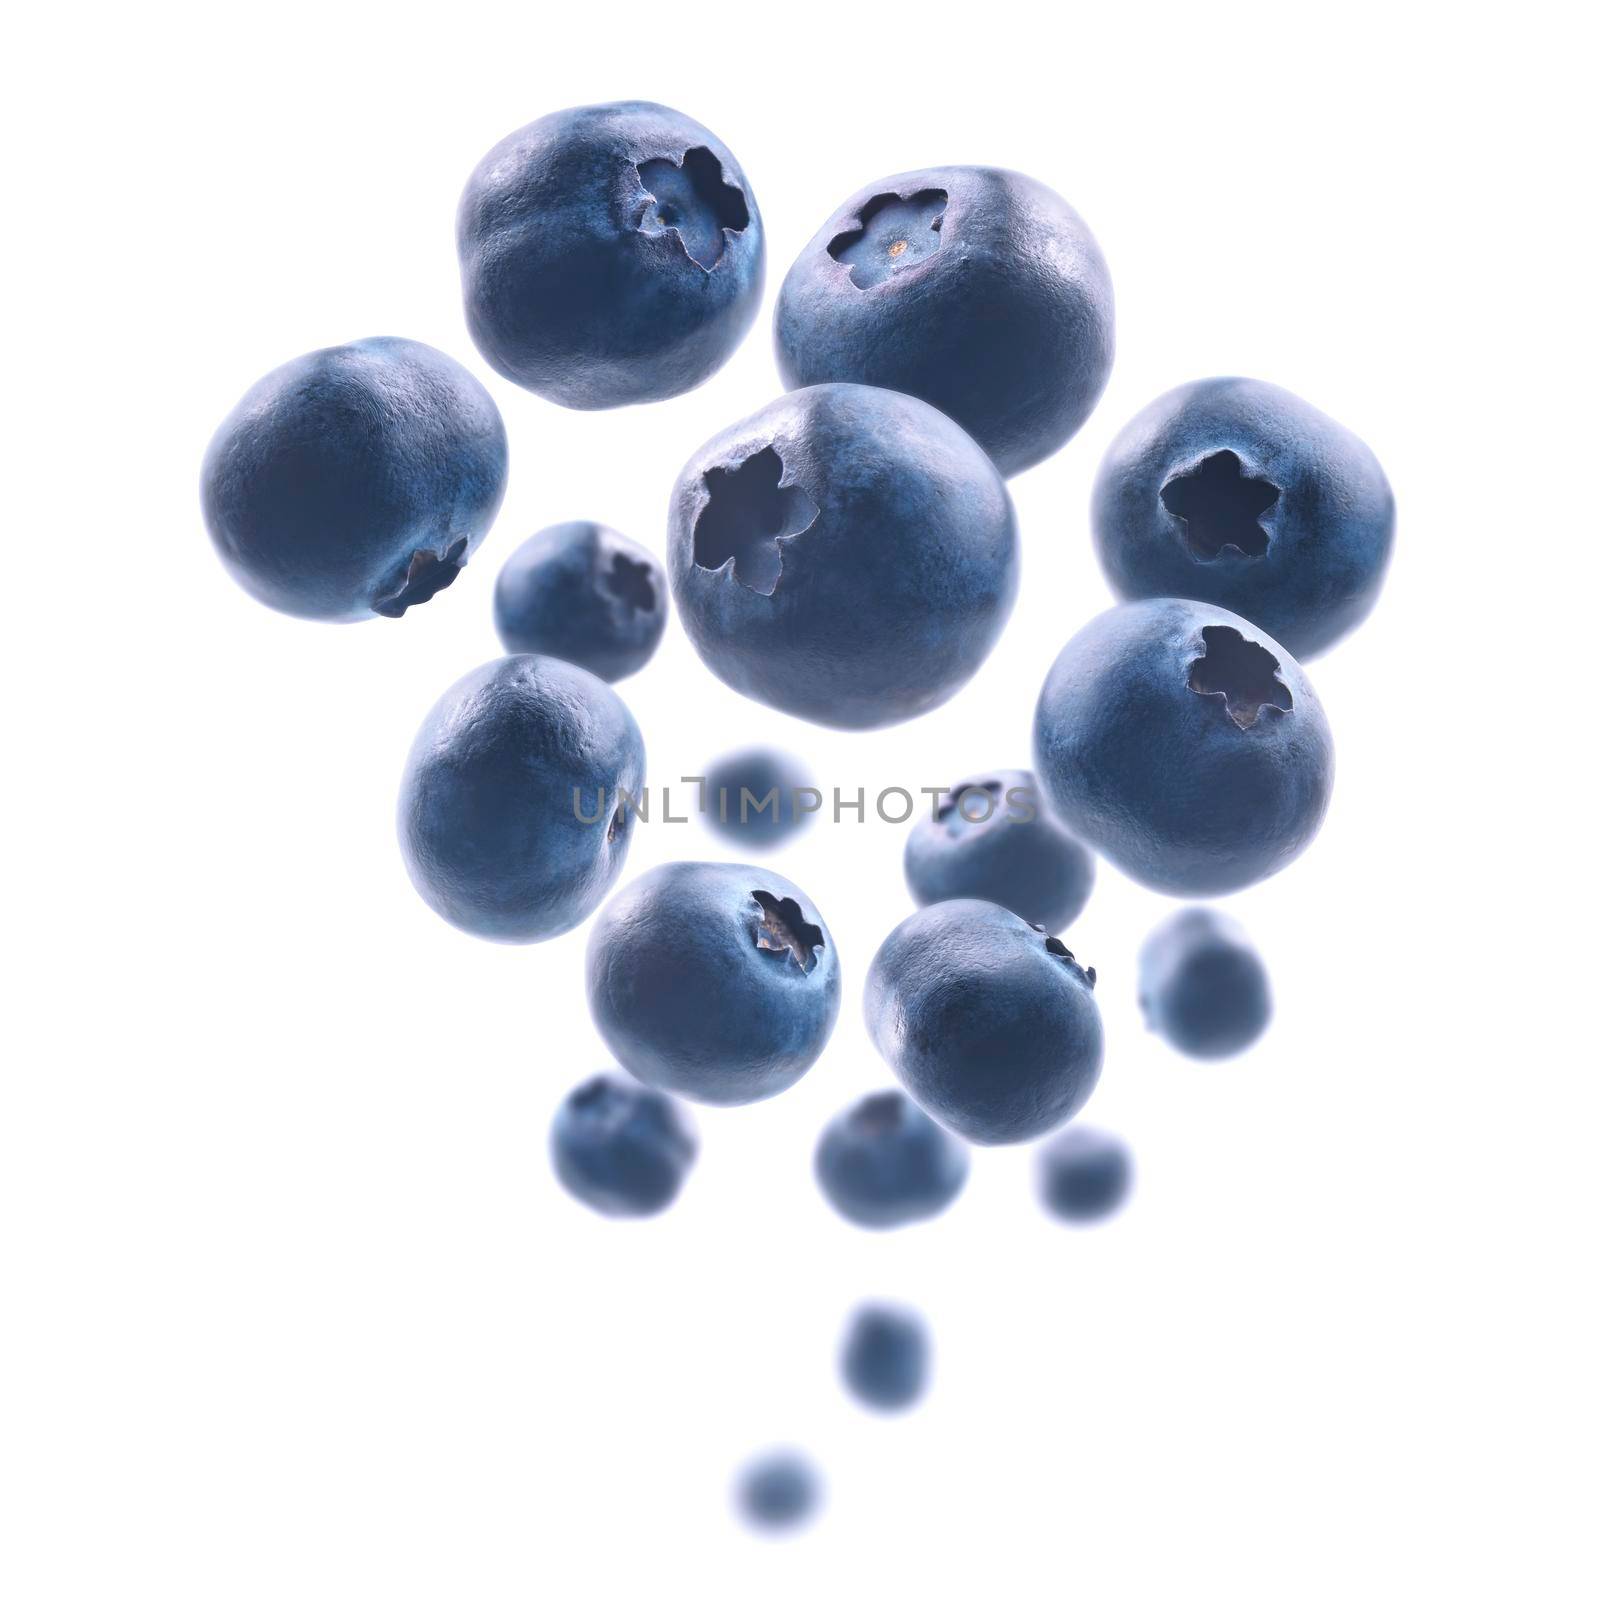 Ripe blueberries levitate on a white background.